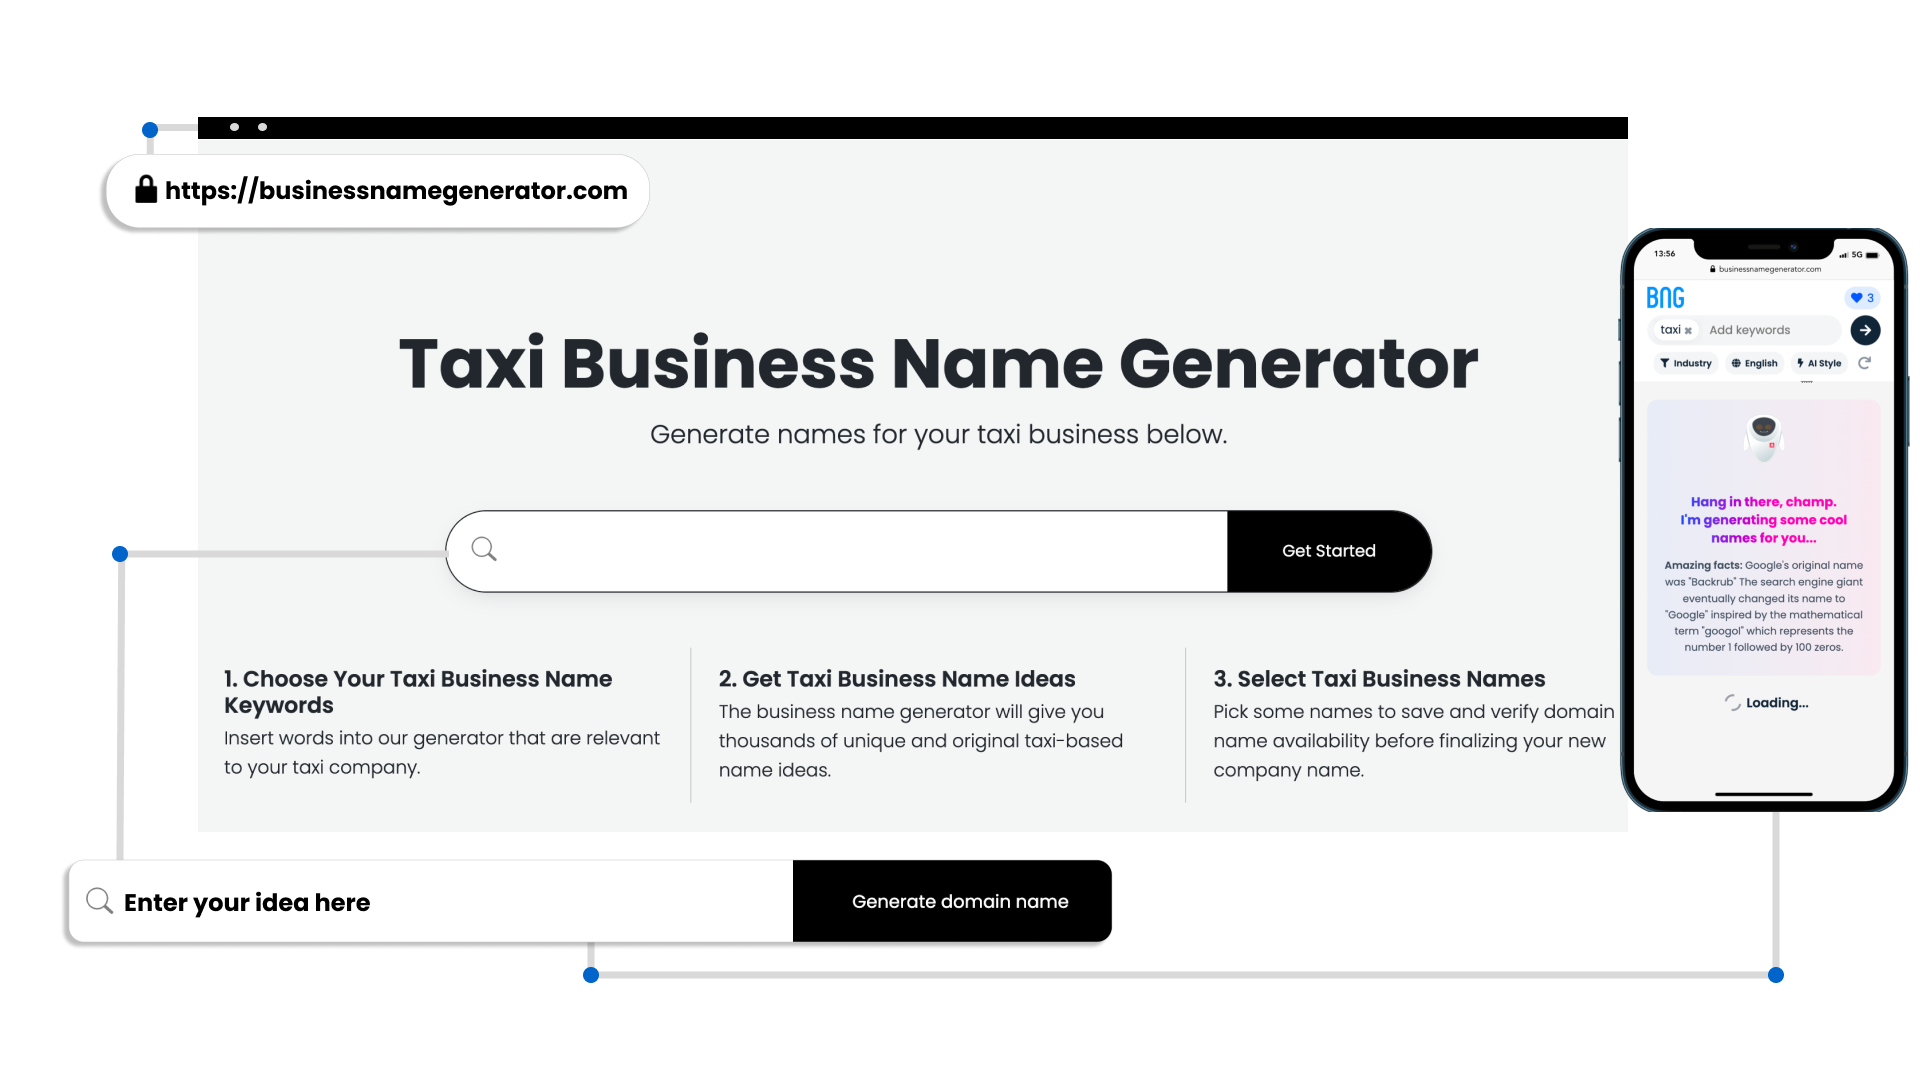 Benefits of Our Taxi Business Name Generator